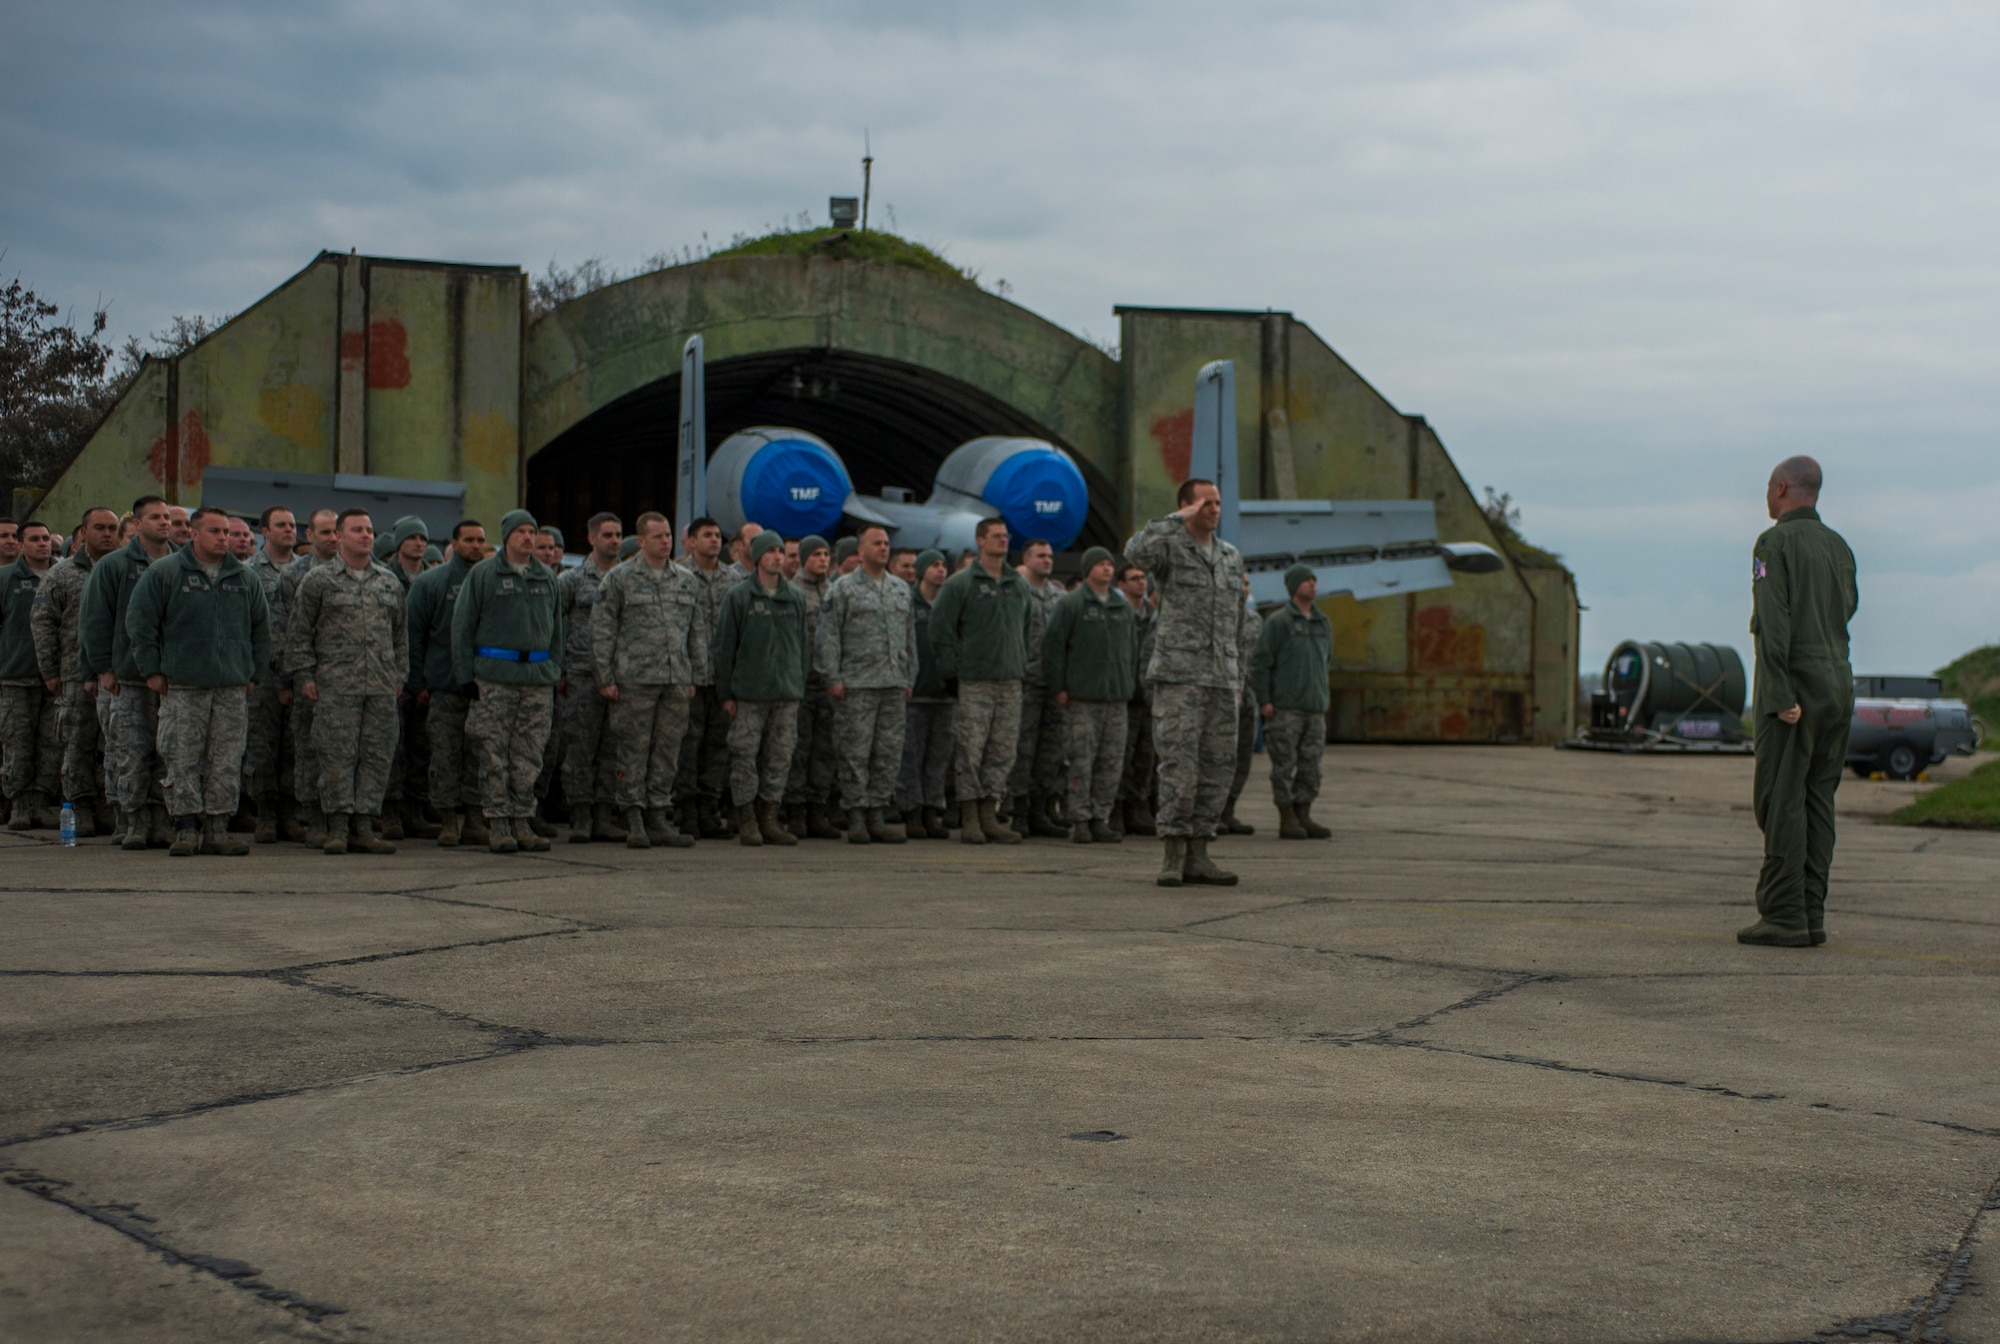 U.S. Air Force Lt. Col. Bryan France, 74th Expeditionary Fighter Squadron commander, right, salutes U.S. Air Force 1st Lt. Jason Story, 74th EFS maintenance officer, before addressing a flight of maintenance Airmen during the 74th EFS’s deployment in support of Operation Atlantic Resolve at Graf Ignatievo, Bulgaria, March 16, 2016. France touted the maintainers’ ability to generate thousands of sorties during their six-month deployment throughout countries in Eastern Europe. (U.S. Air Force photo by Staff Sgt. Joe W. McFadden/Released)